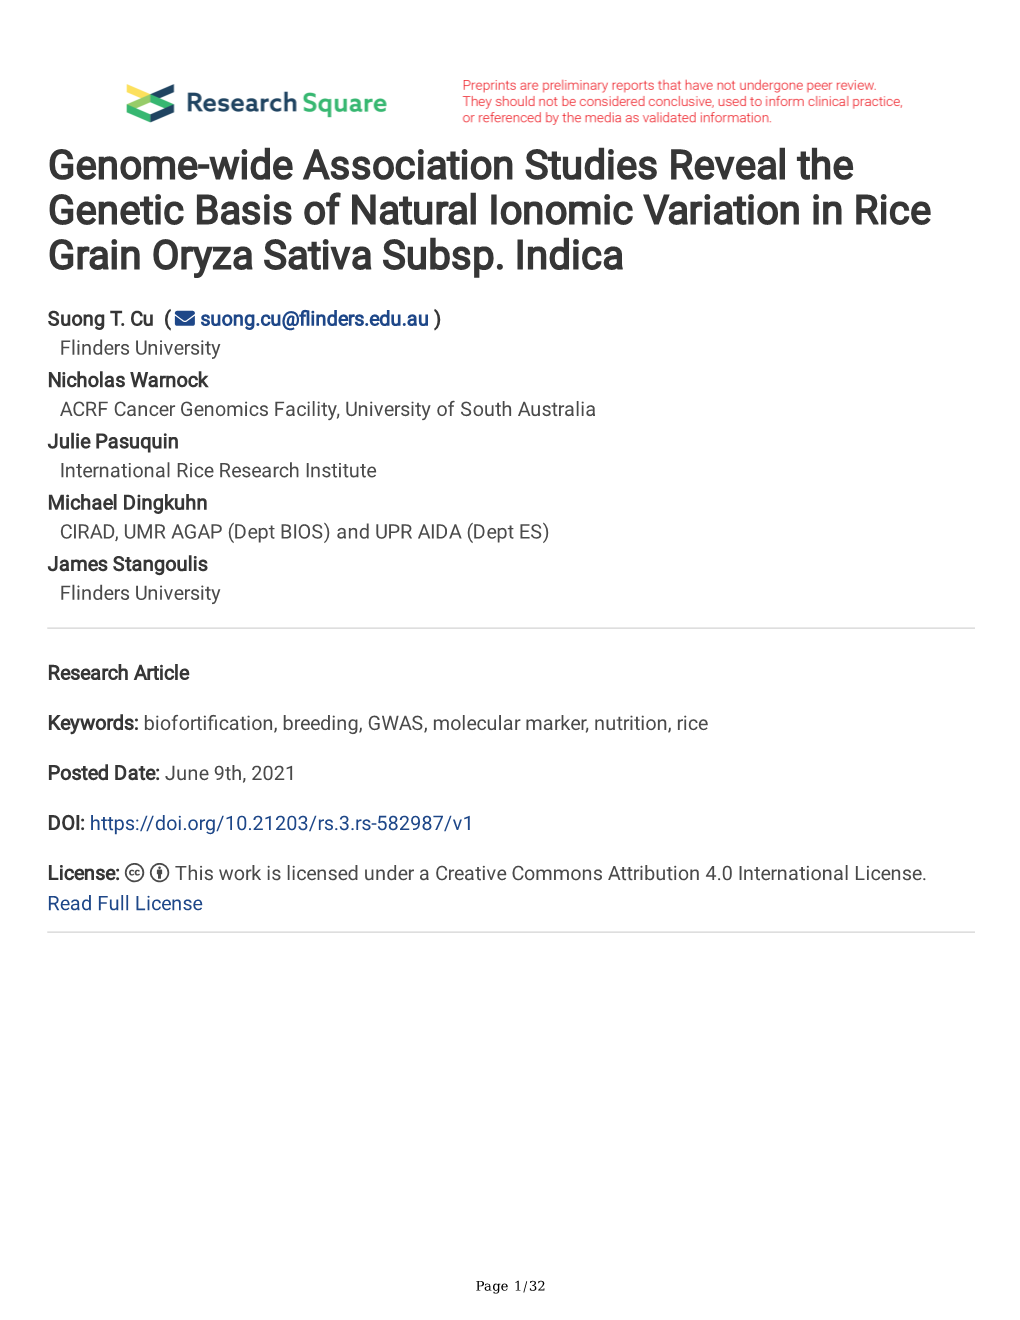 Genome-Wide Association Studies Reveal the Genetic Basis of Natural Ionomic Variation in Rice Grain Oryza Sativa Subsp